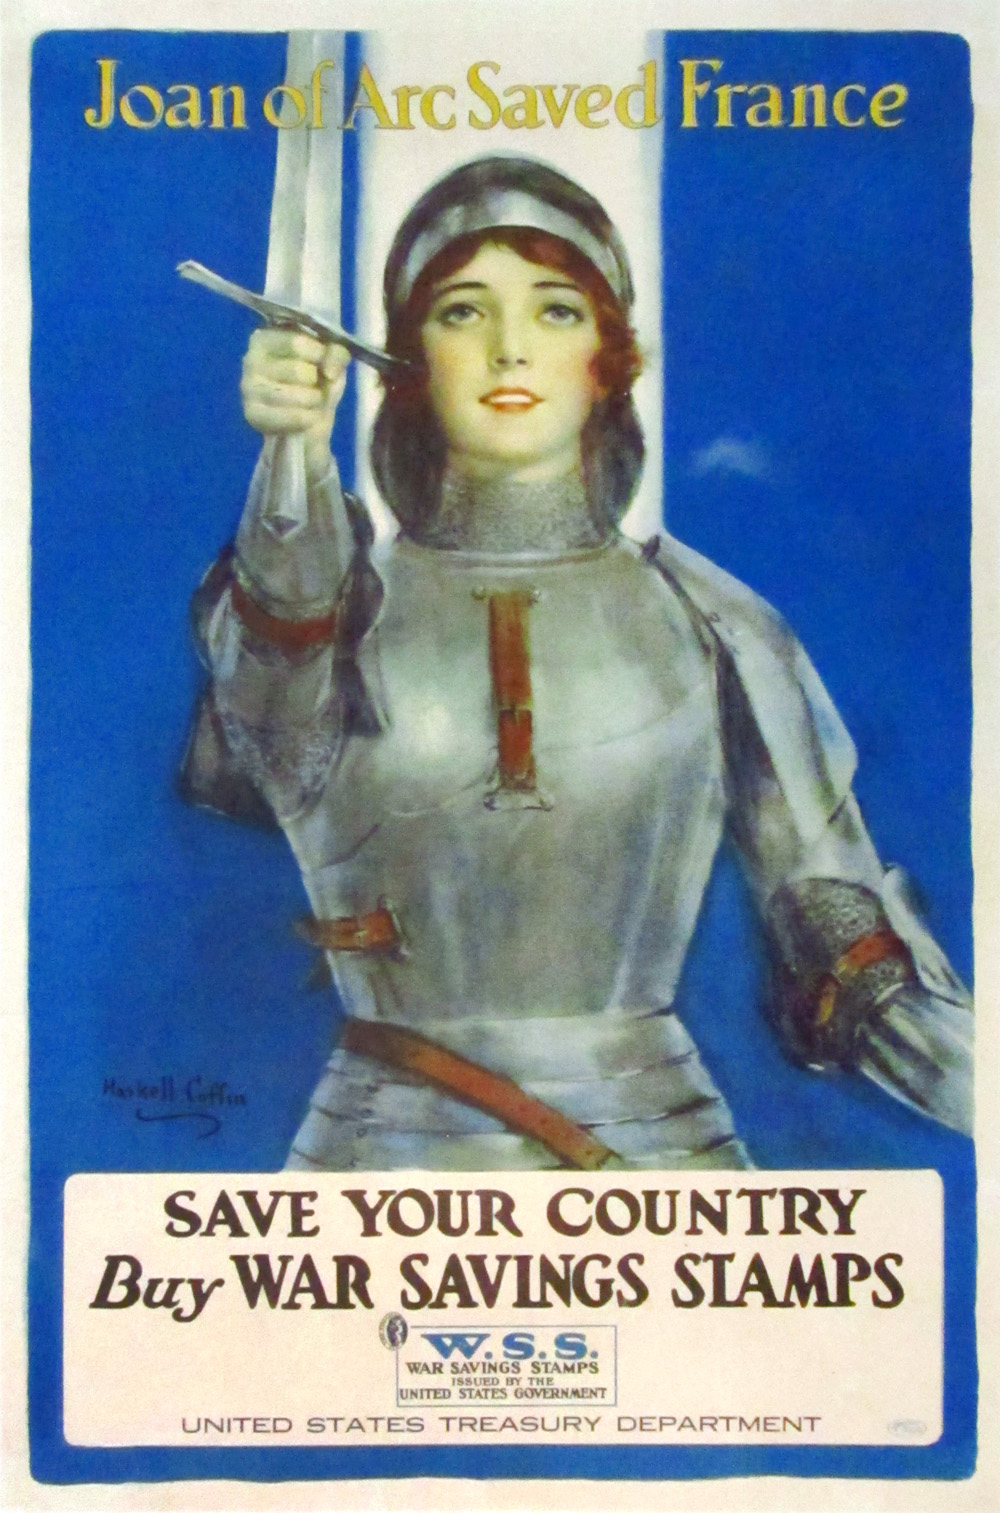 Joan of Arc Saved France - Save Your Country